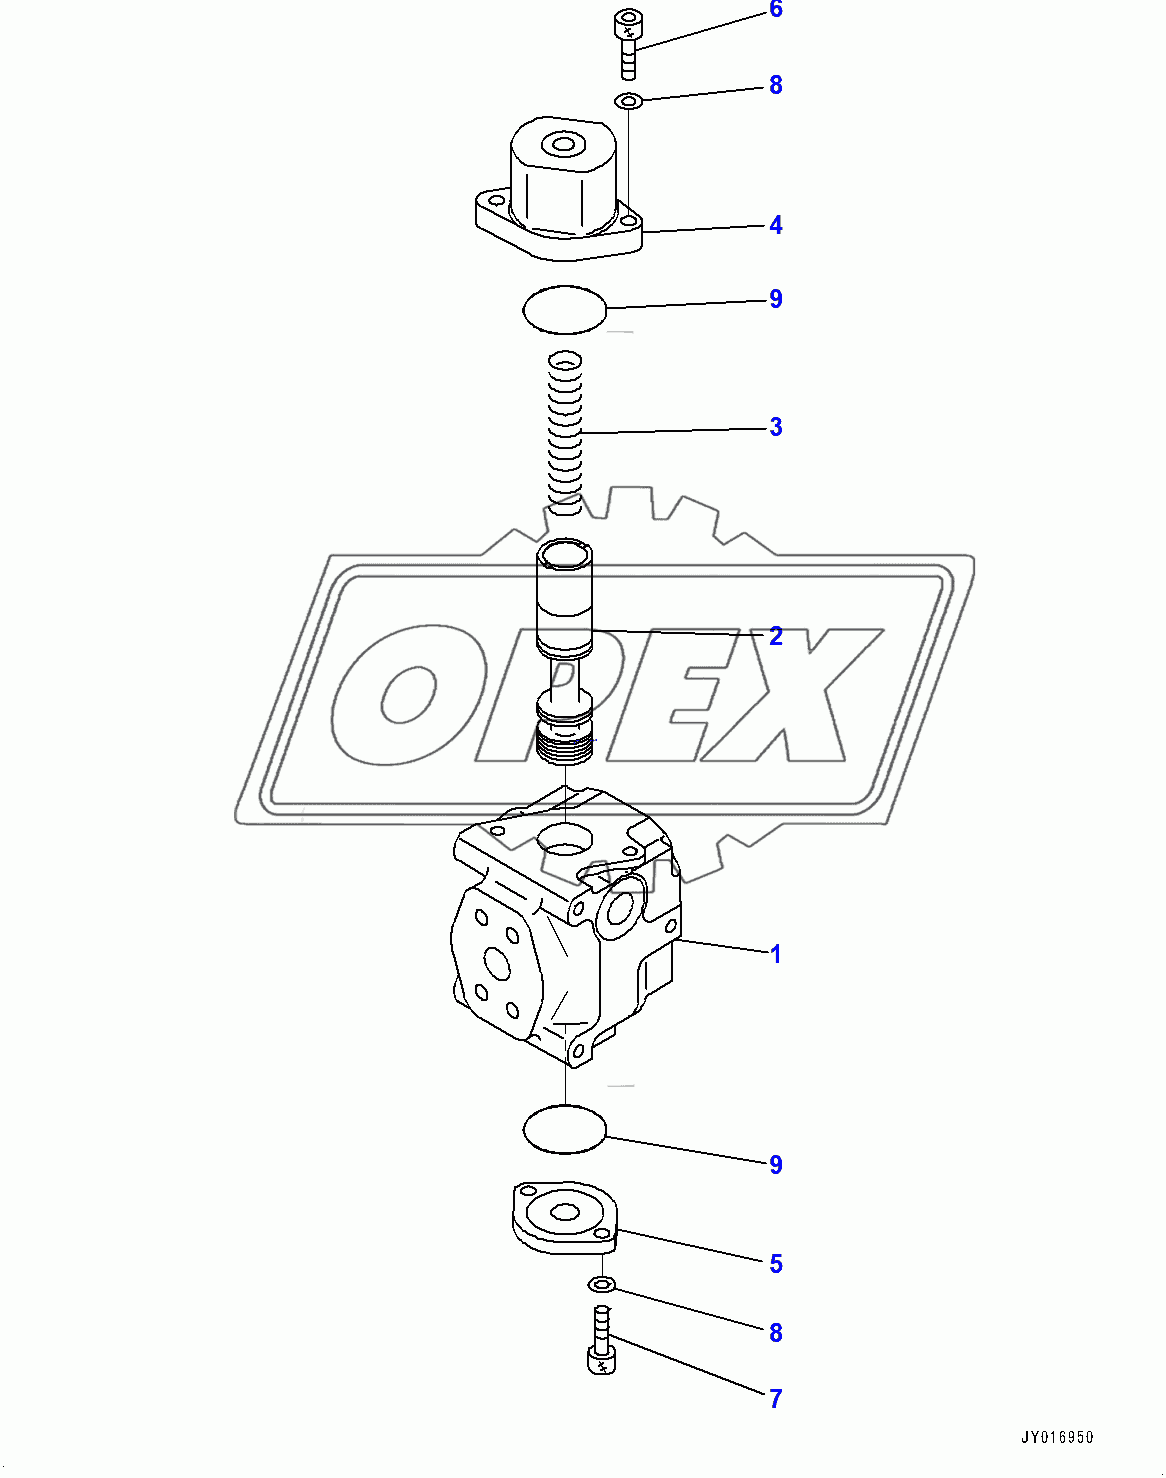  Actuator Piping, Control Pattern Change Over Valve (400001-) 1